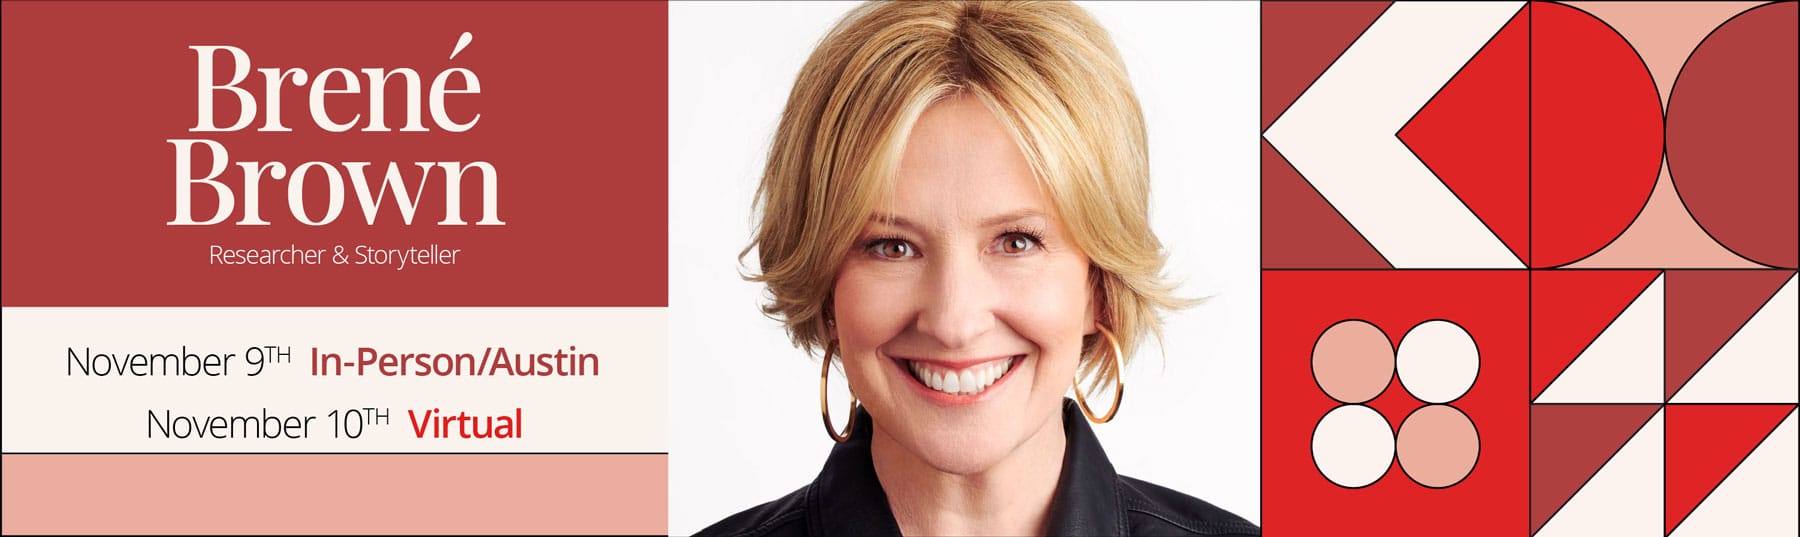 Join Brené Brown at the TX Conference for Women on November 9-10th!